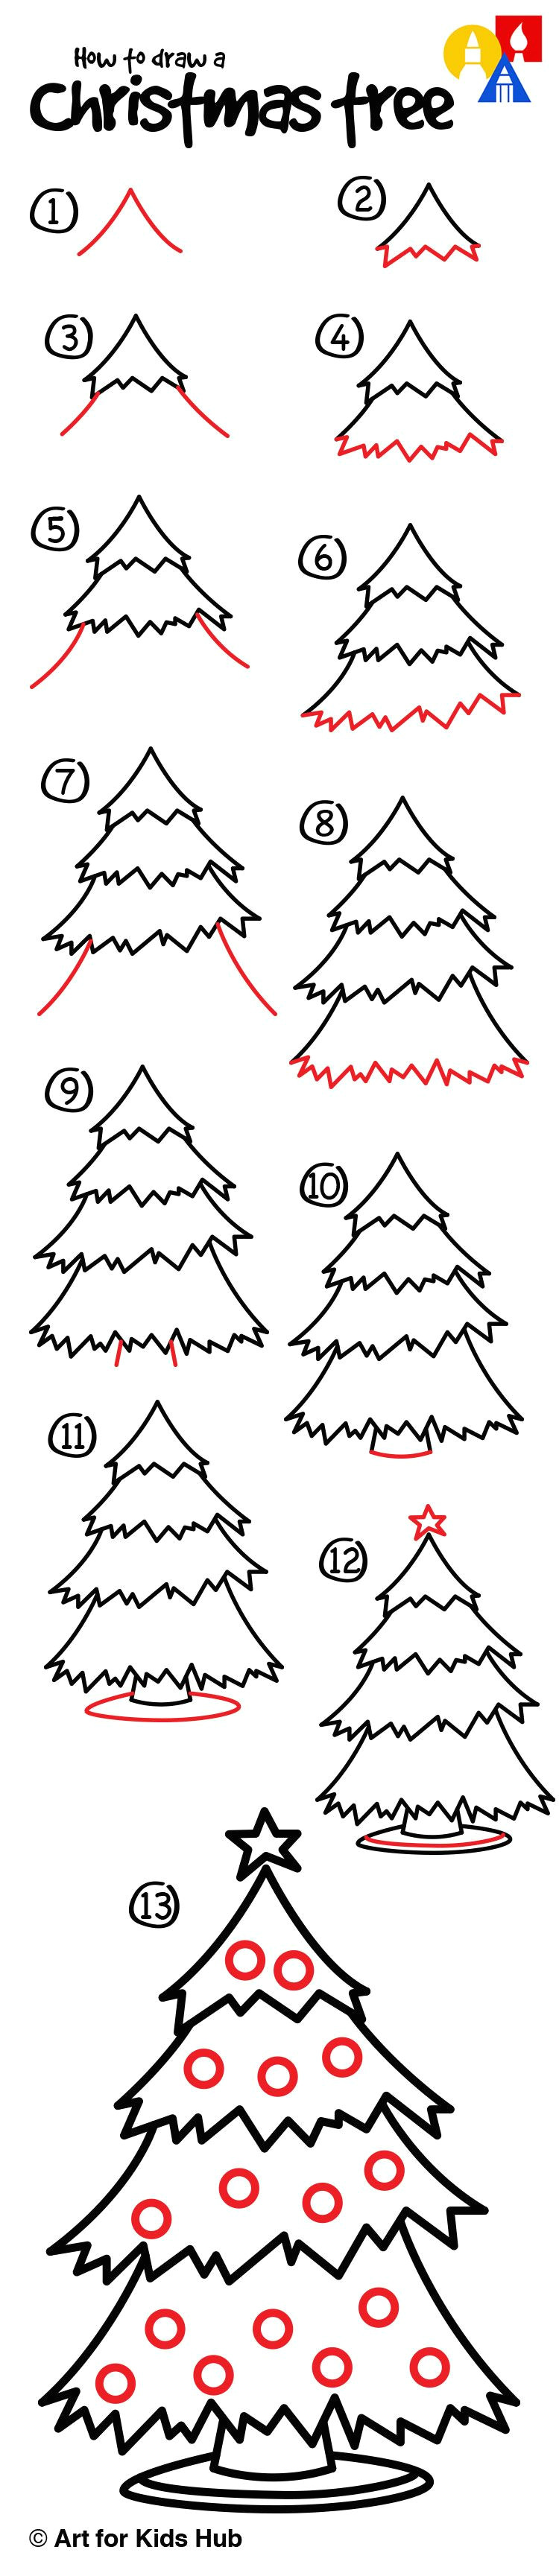 Drawing Of A Christmas Tree How to Draw A Christmas Tree Art for Kids Hub D D N D D D D D Dµ